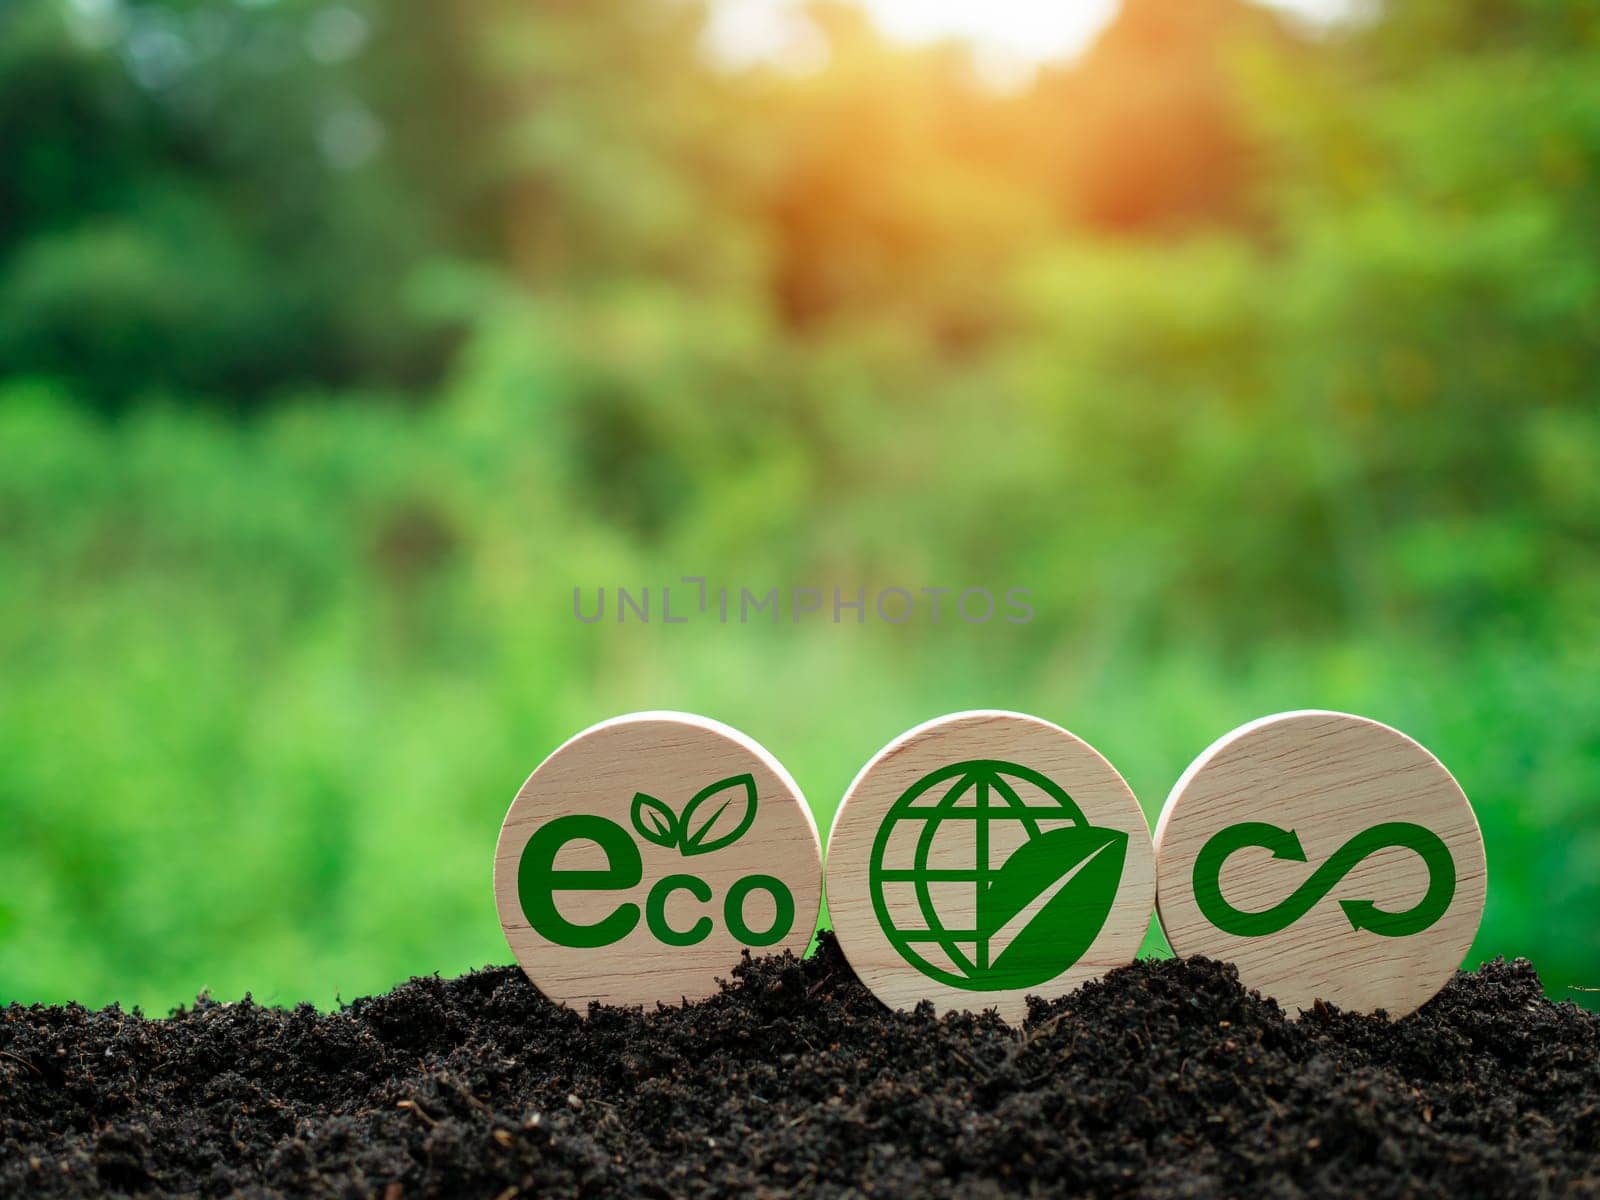 Concepts of waste reduction, pollution, reuse, efficient use of resources. Environmental protection sign by recycling on circular wooden board on nature background.